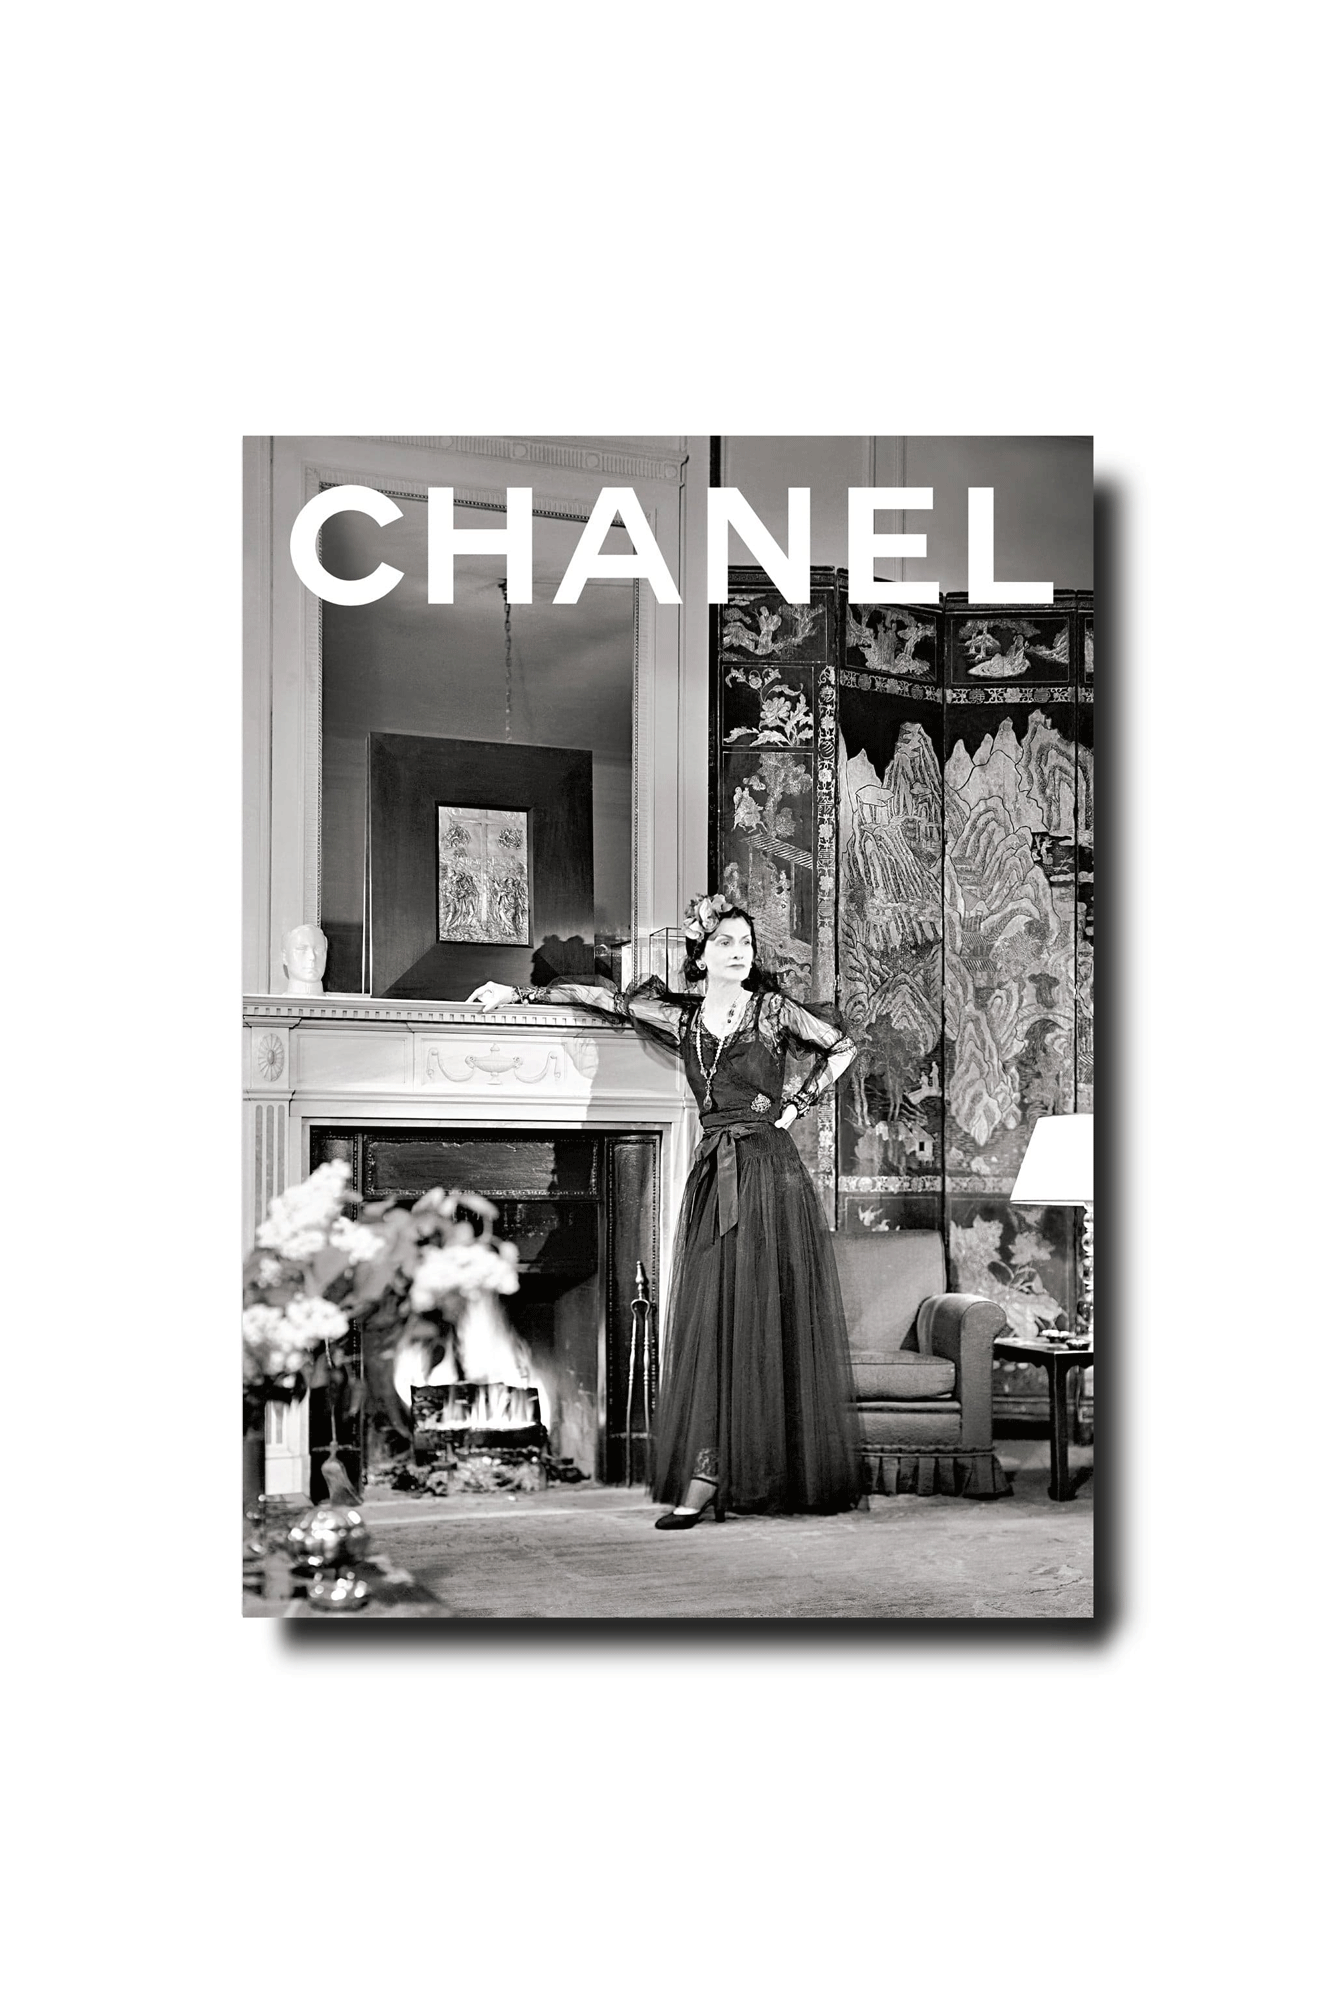 This exquisite Chanel Slipcase set from Assouline features three volumes celebrating the timeless heritage of the iconic fashion house. Chanel Fashion by Anne Berest traces the visionary style of Coco Chanel, while Chanel Jewelry and Watches and Chanel Fragrance and Beauty shed light on the innovative designs of Karl Lagerfeld and Virginie Viard. Beautifully crafted and luxuriously designed, this set a must-have for the modern fashionista.